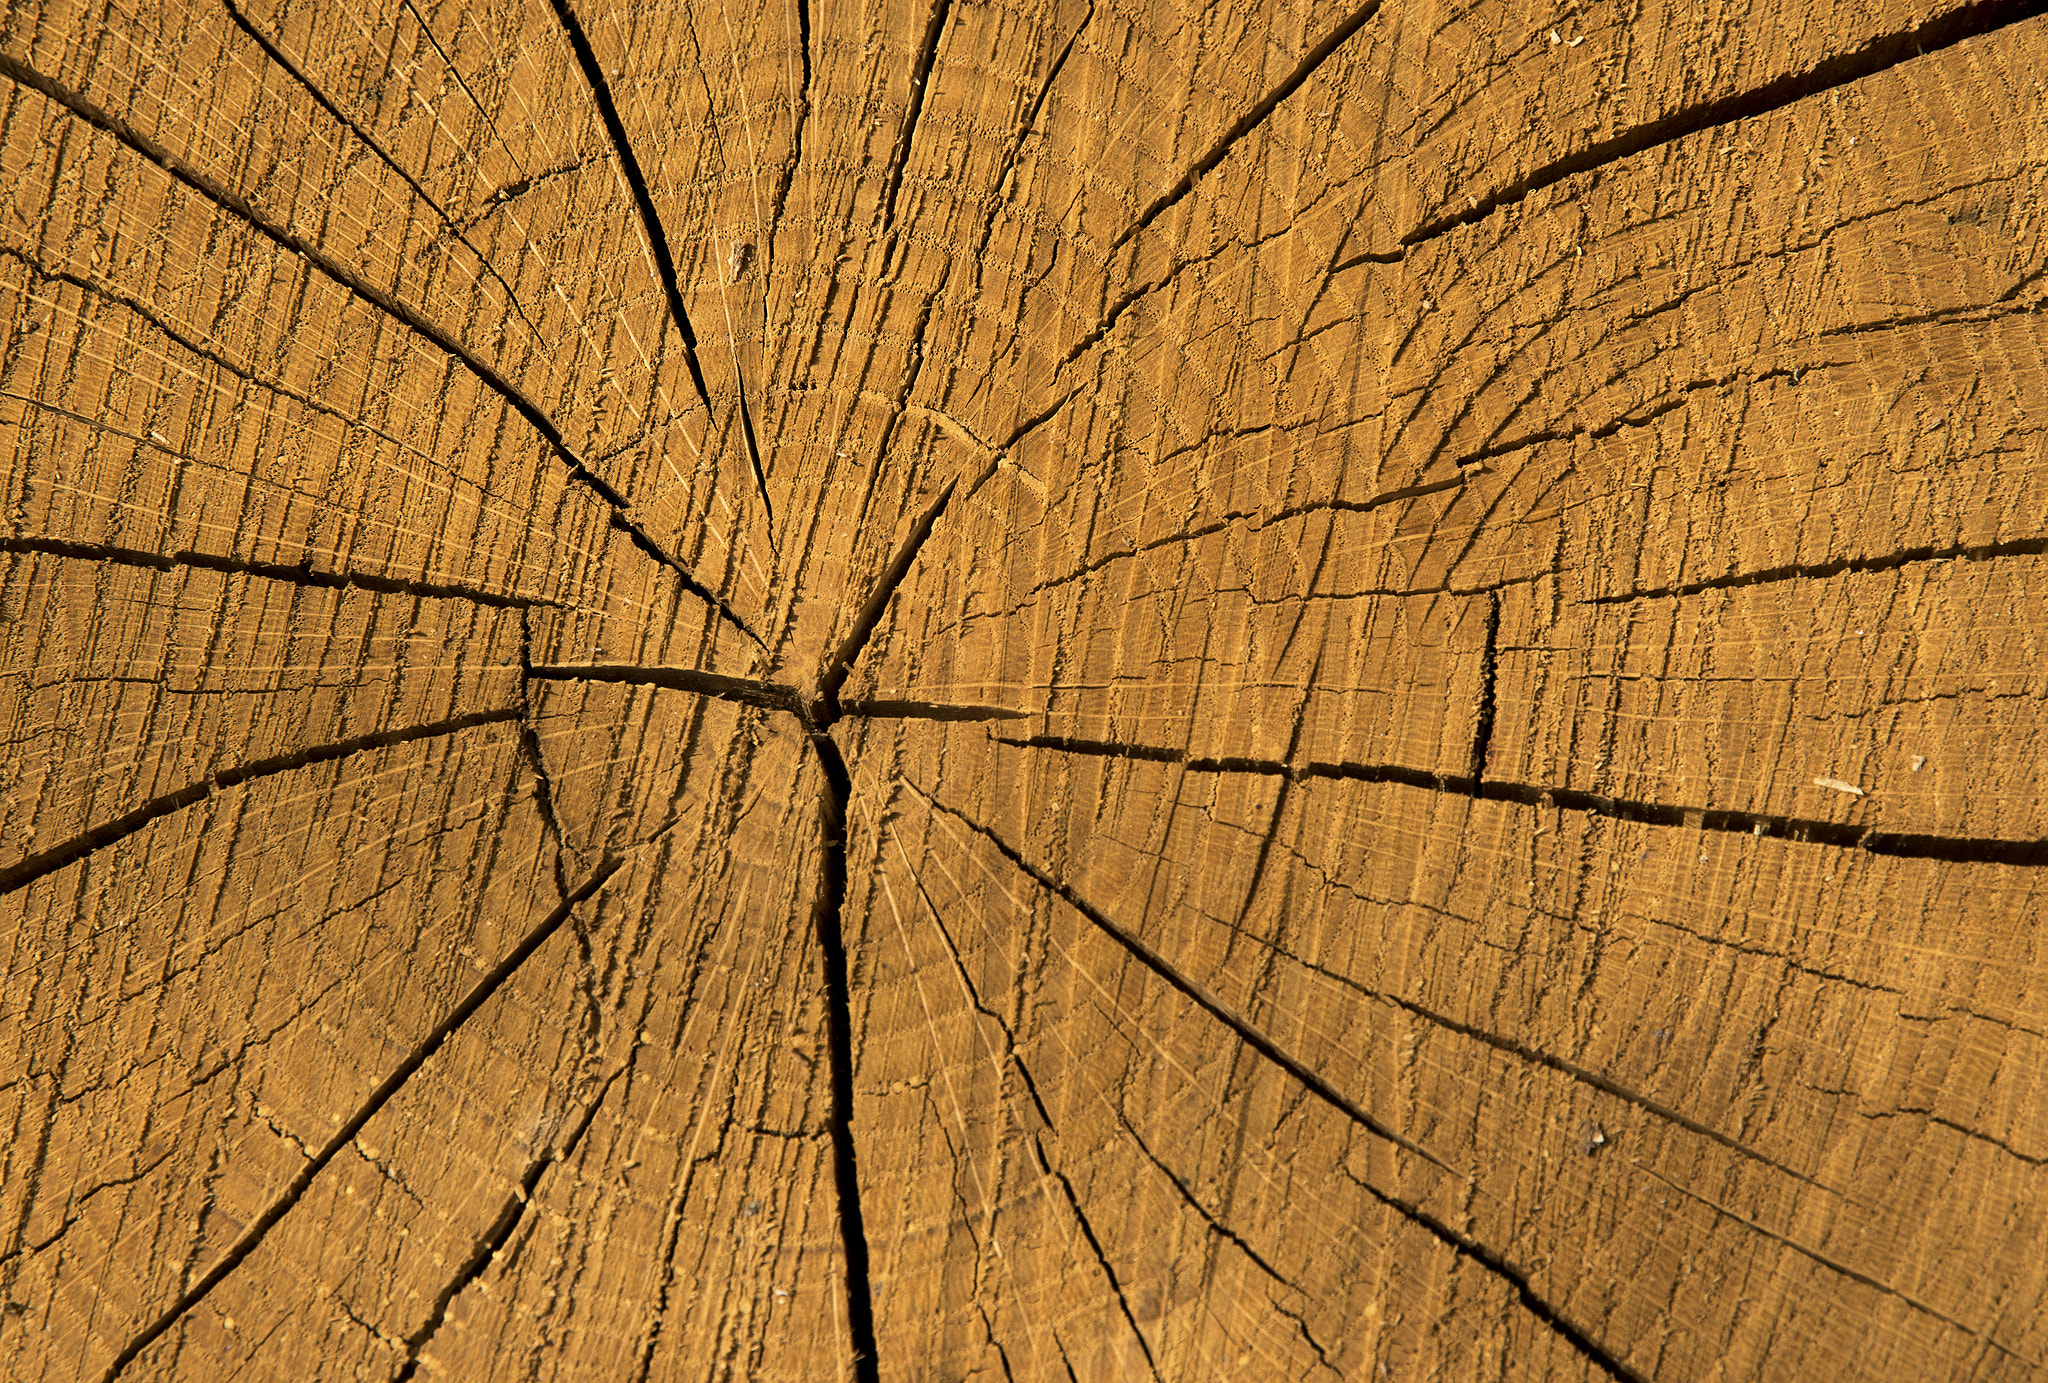 Nikon D5500 sample photo. Wood texture of cutted tree trunk photography